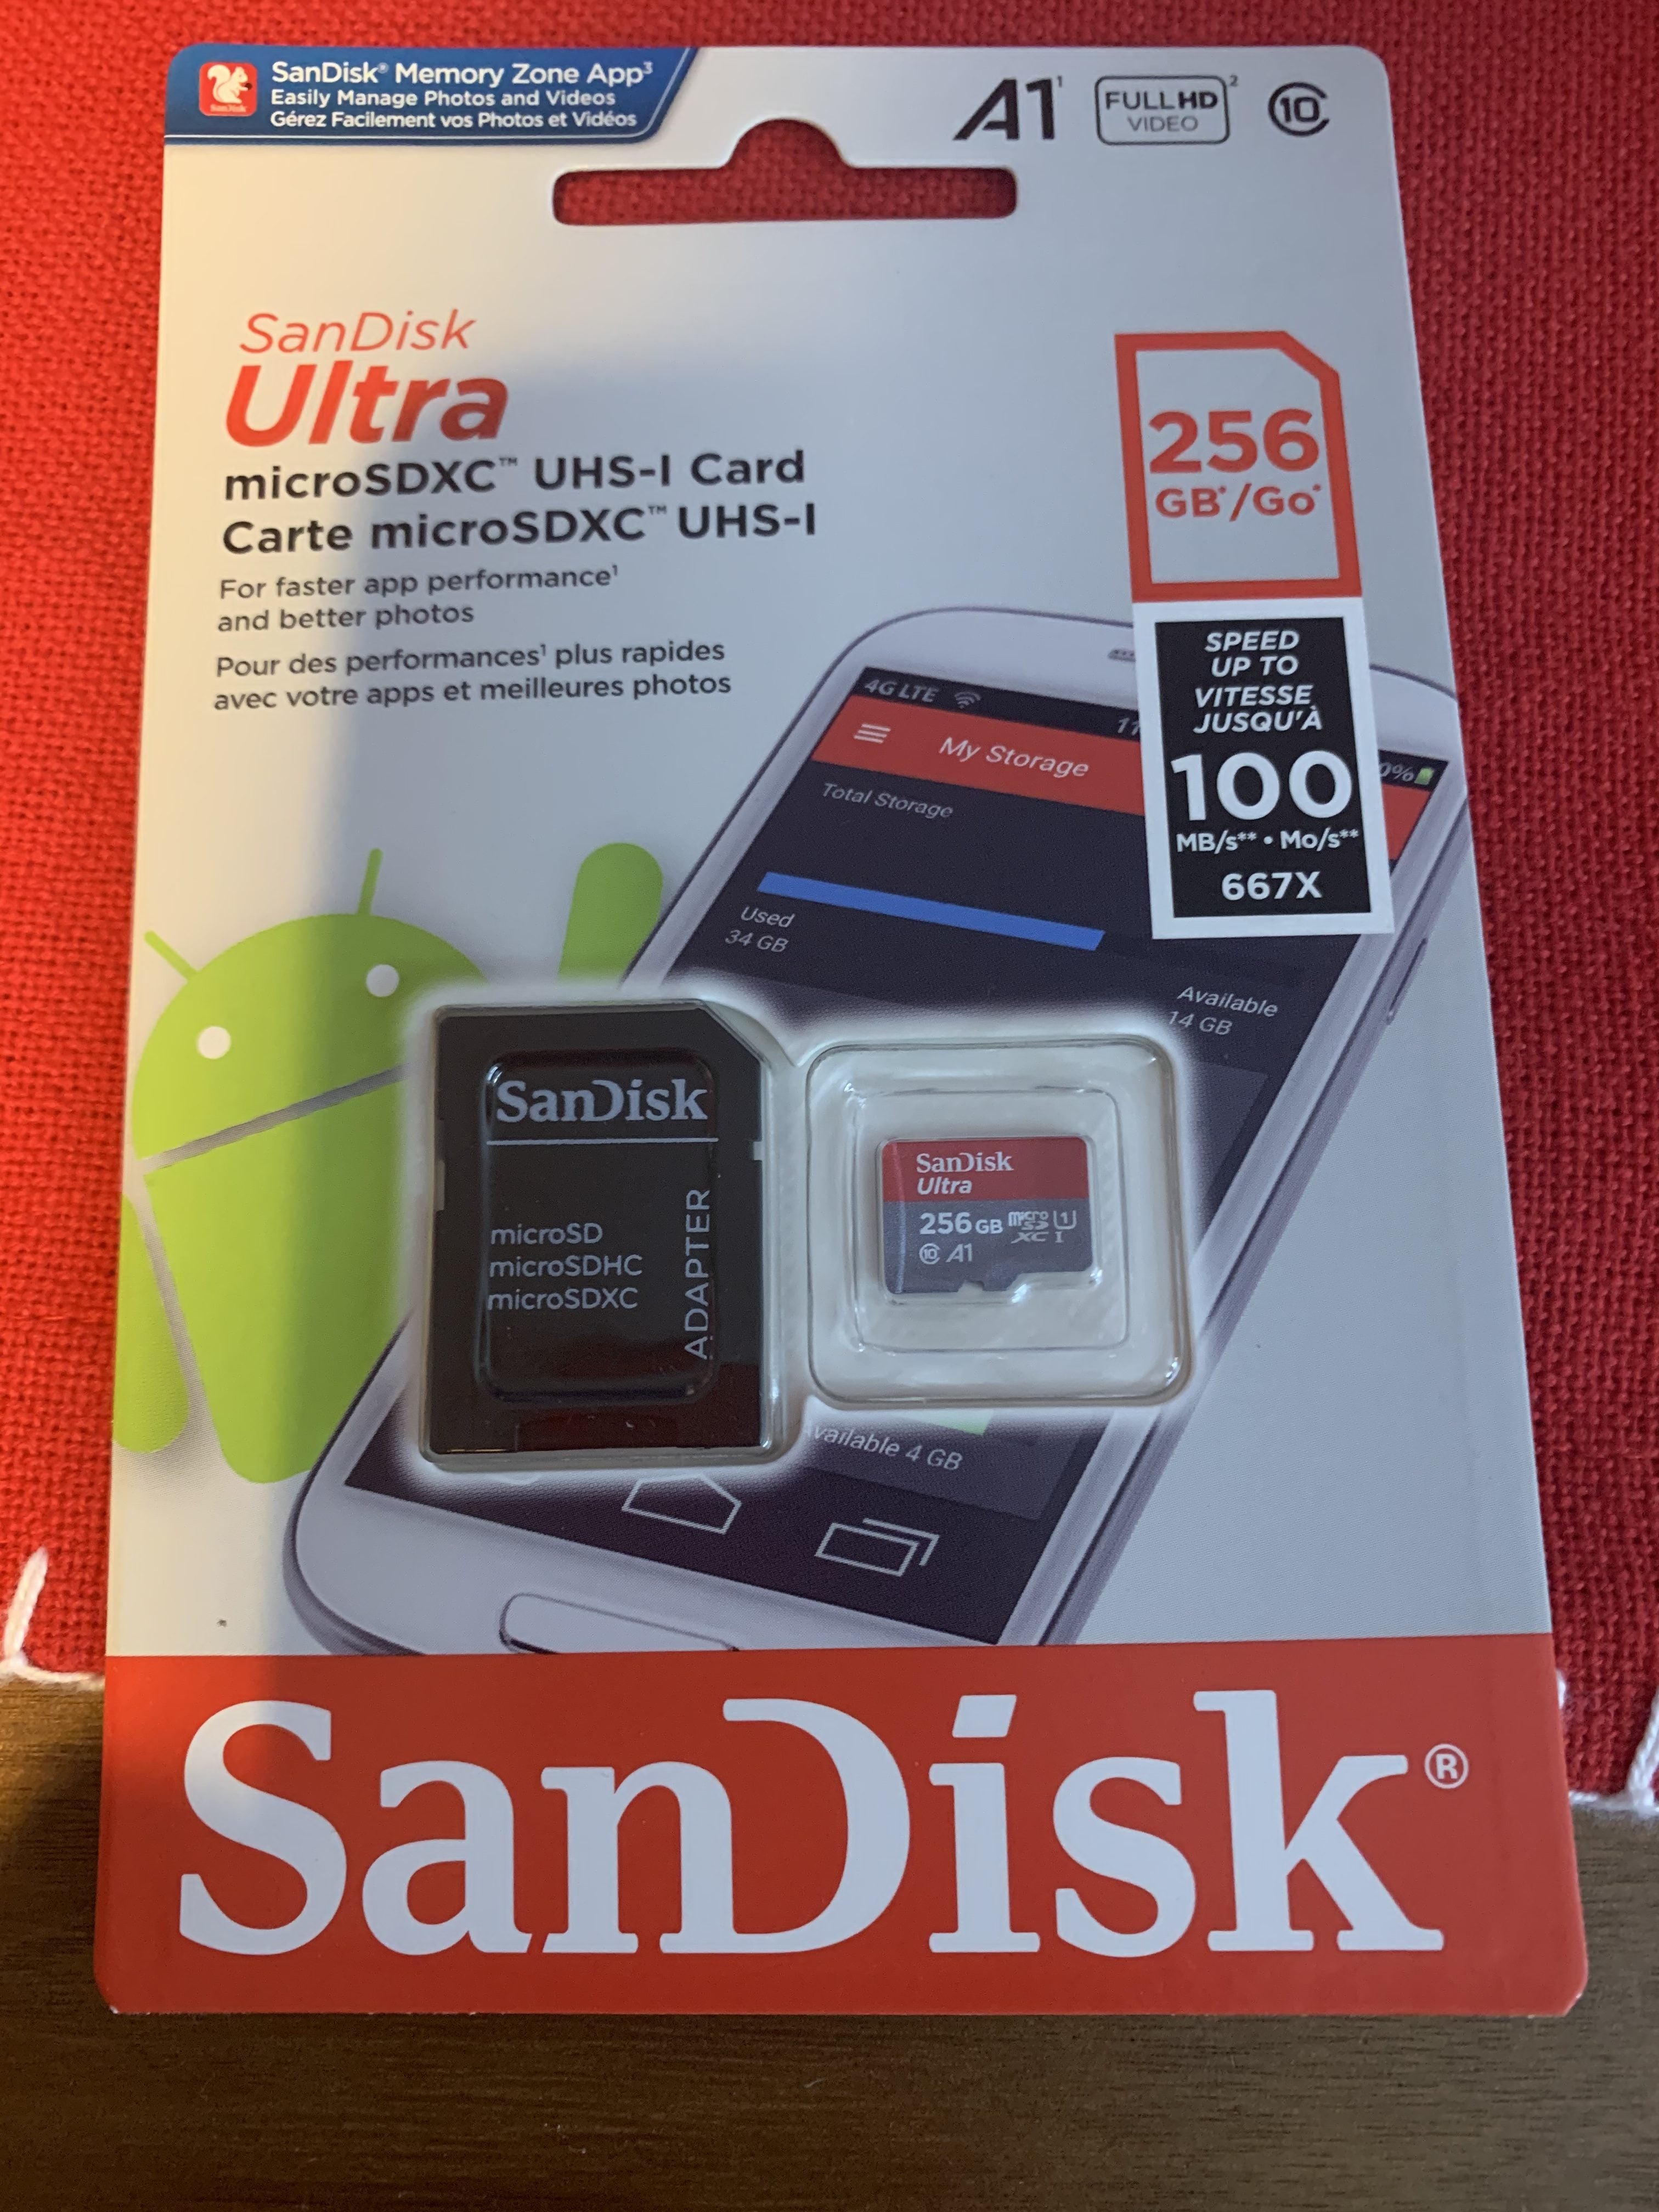 Costco Sandisk Micro Sd Card 128gb For 19 99 256gb 39 99 Redflagdeals Com Forums